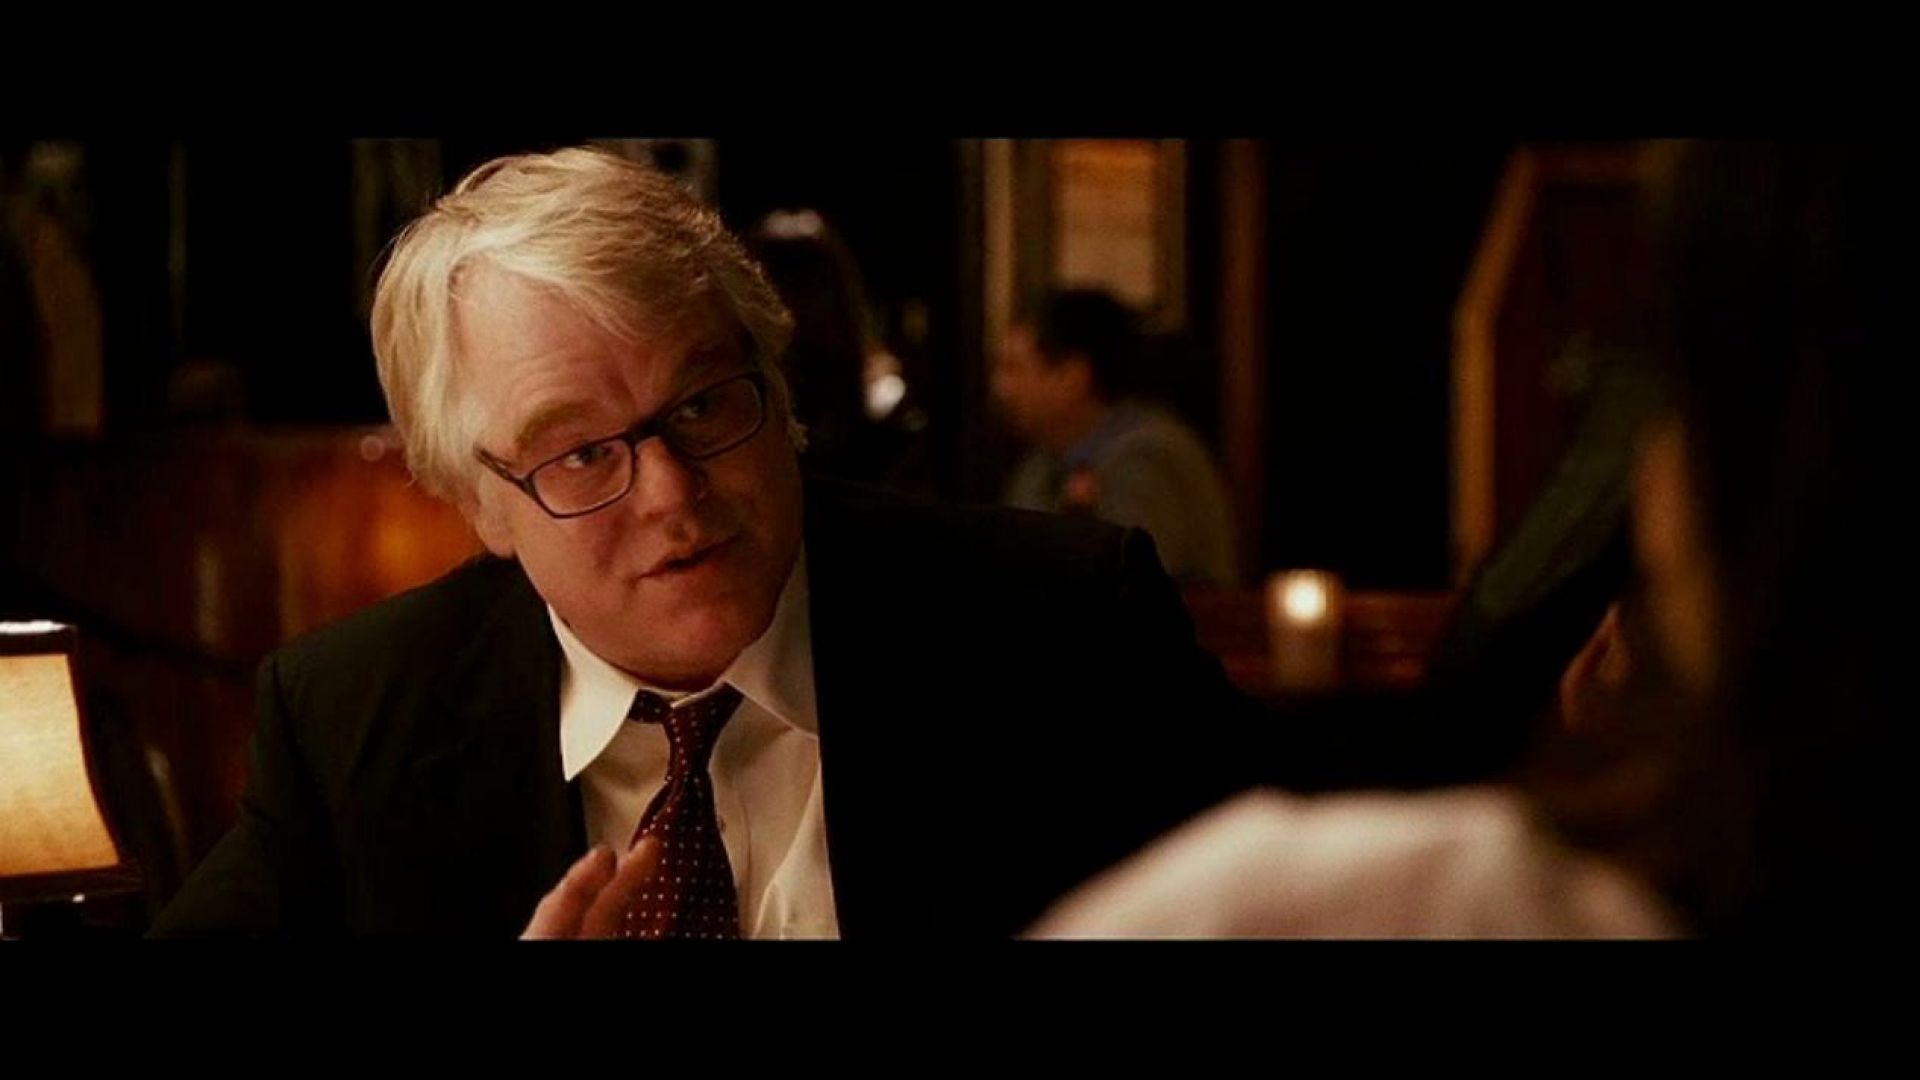 Philip Seymour Hoffman and Marisa Tomei talk about the State of the Union in Ides of March